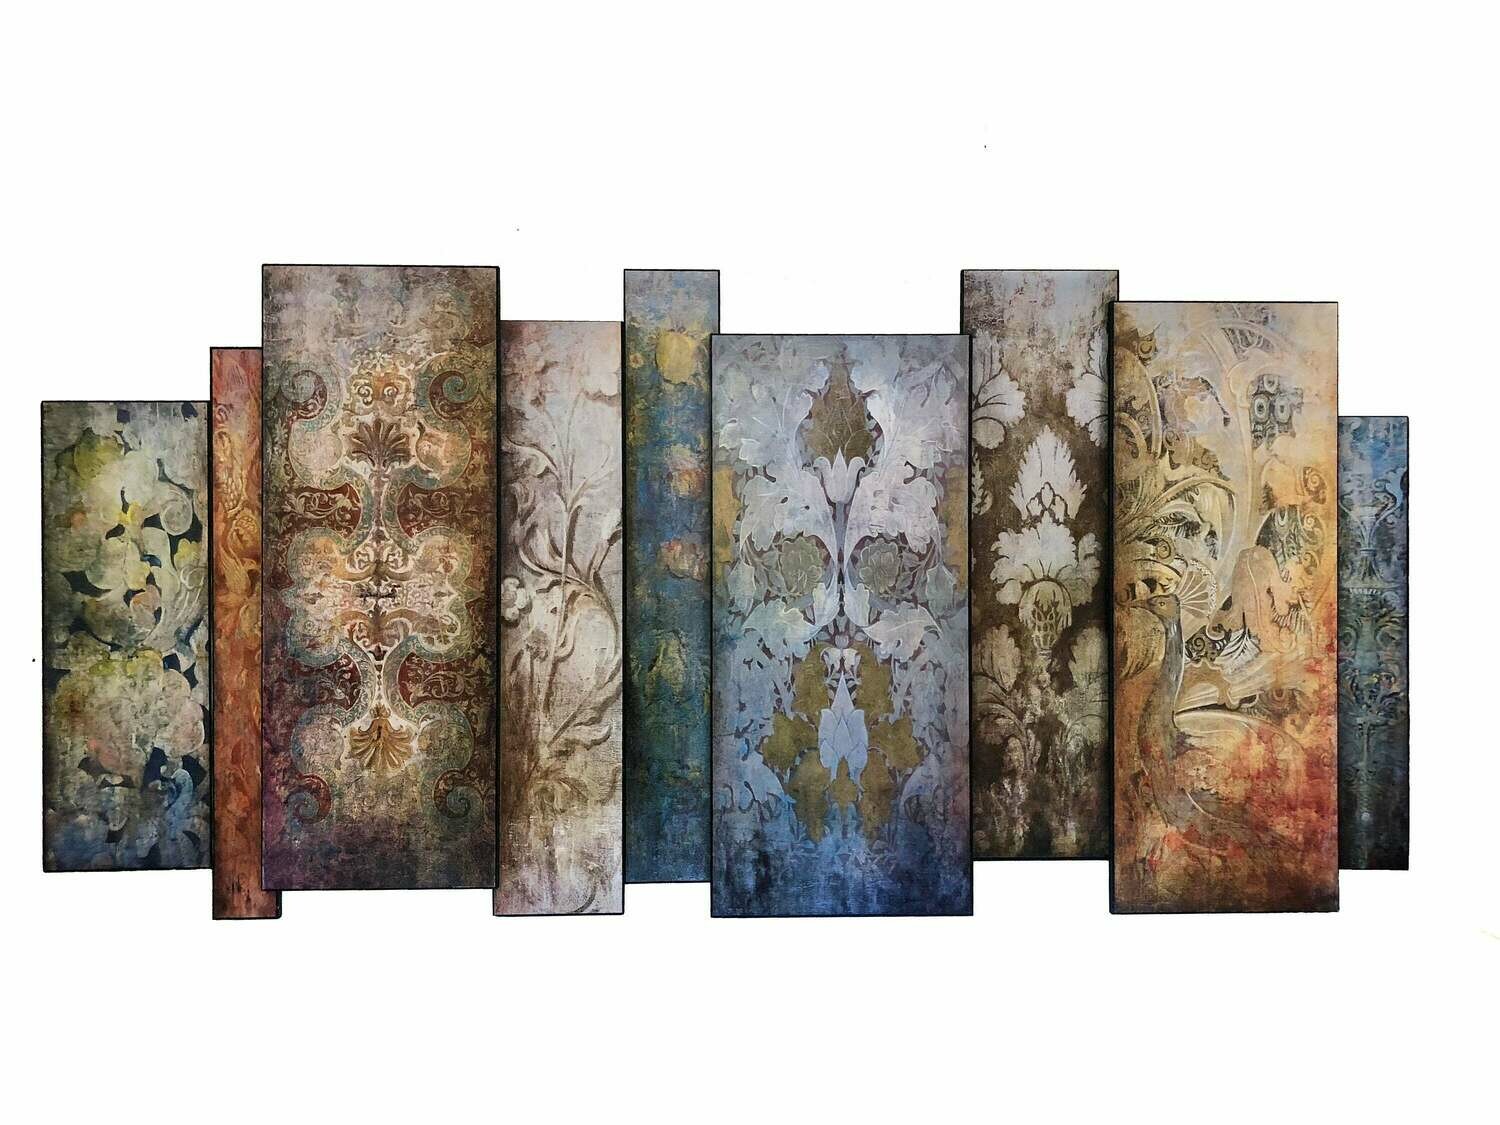 66 Inch Art Panel Faded Memory Offset Panels Mural Home Decor